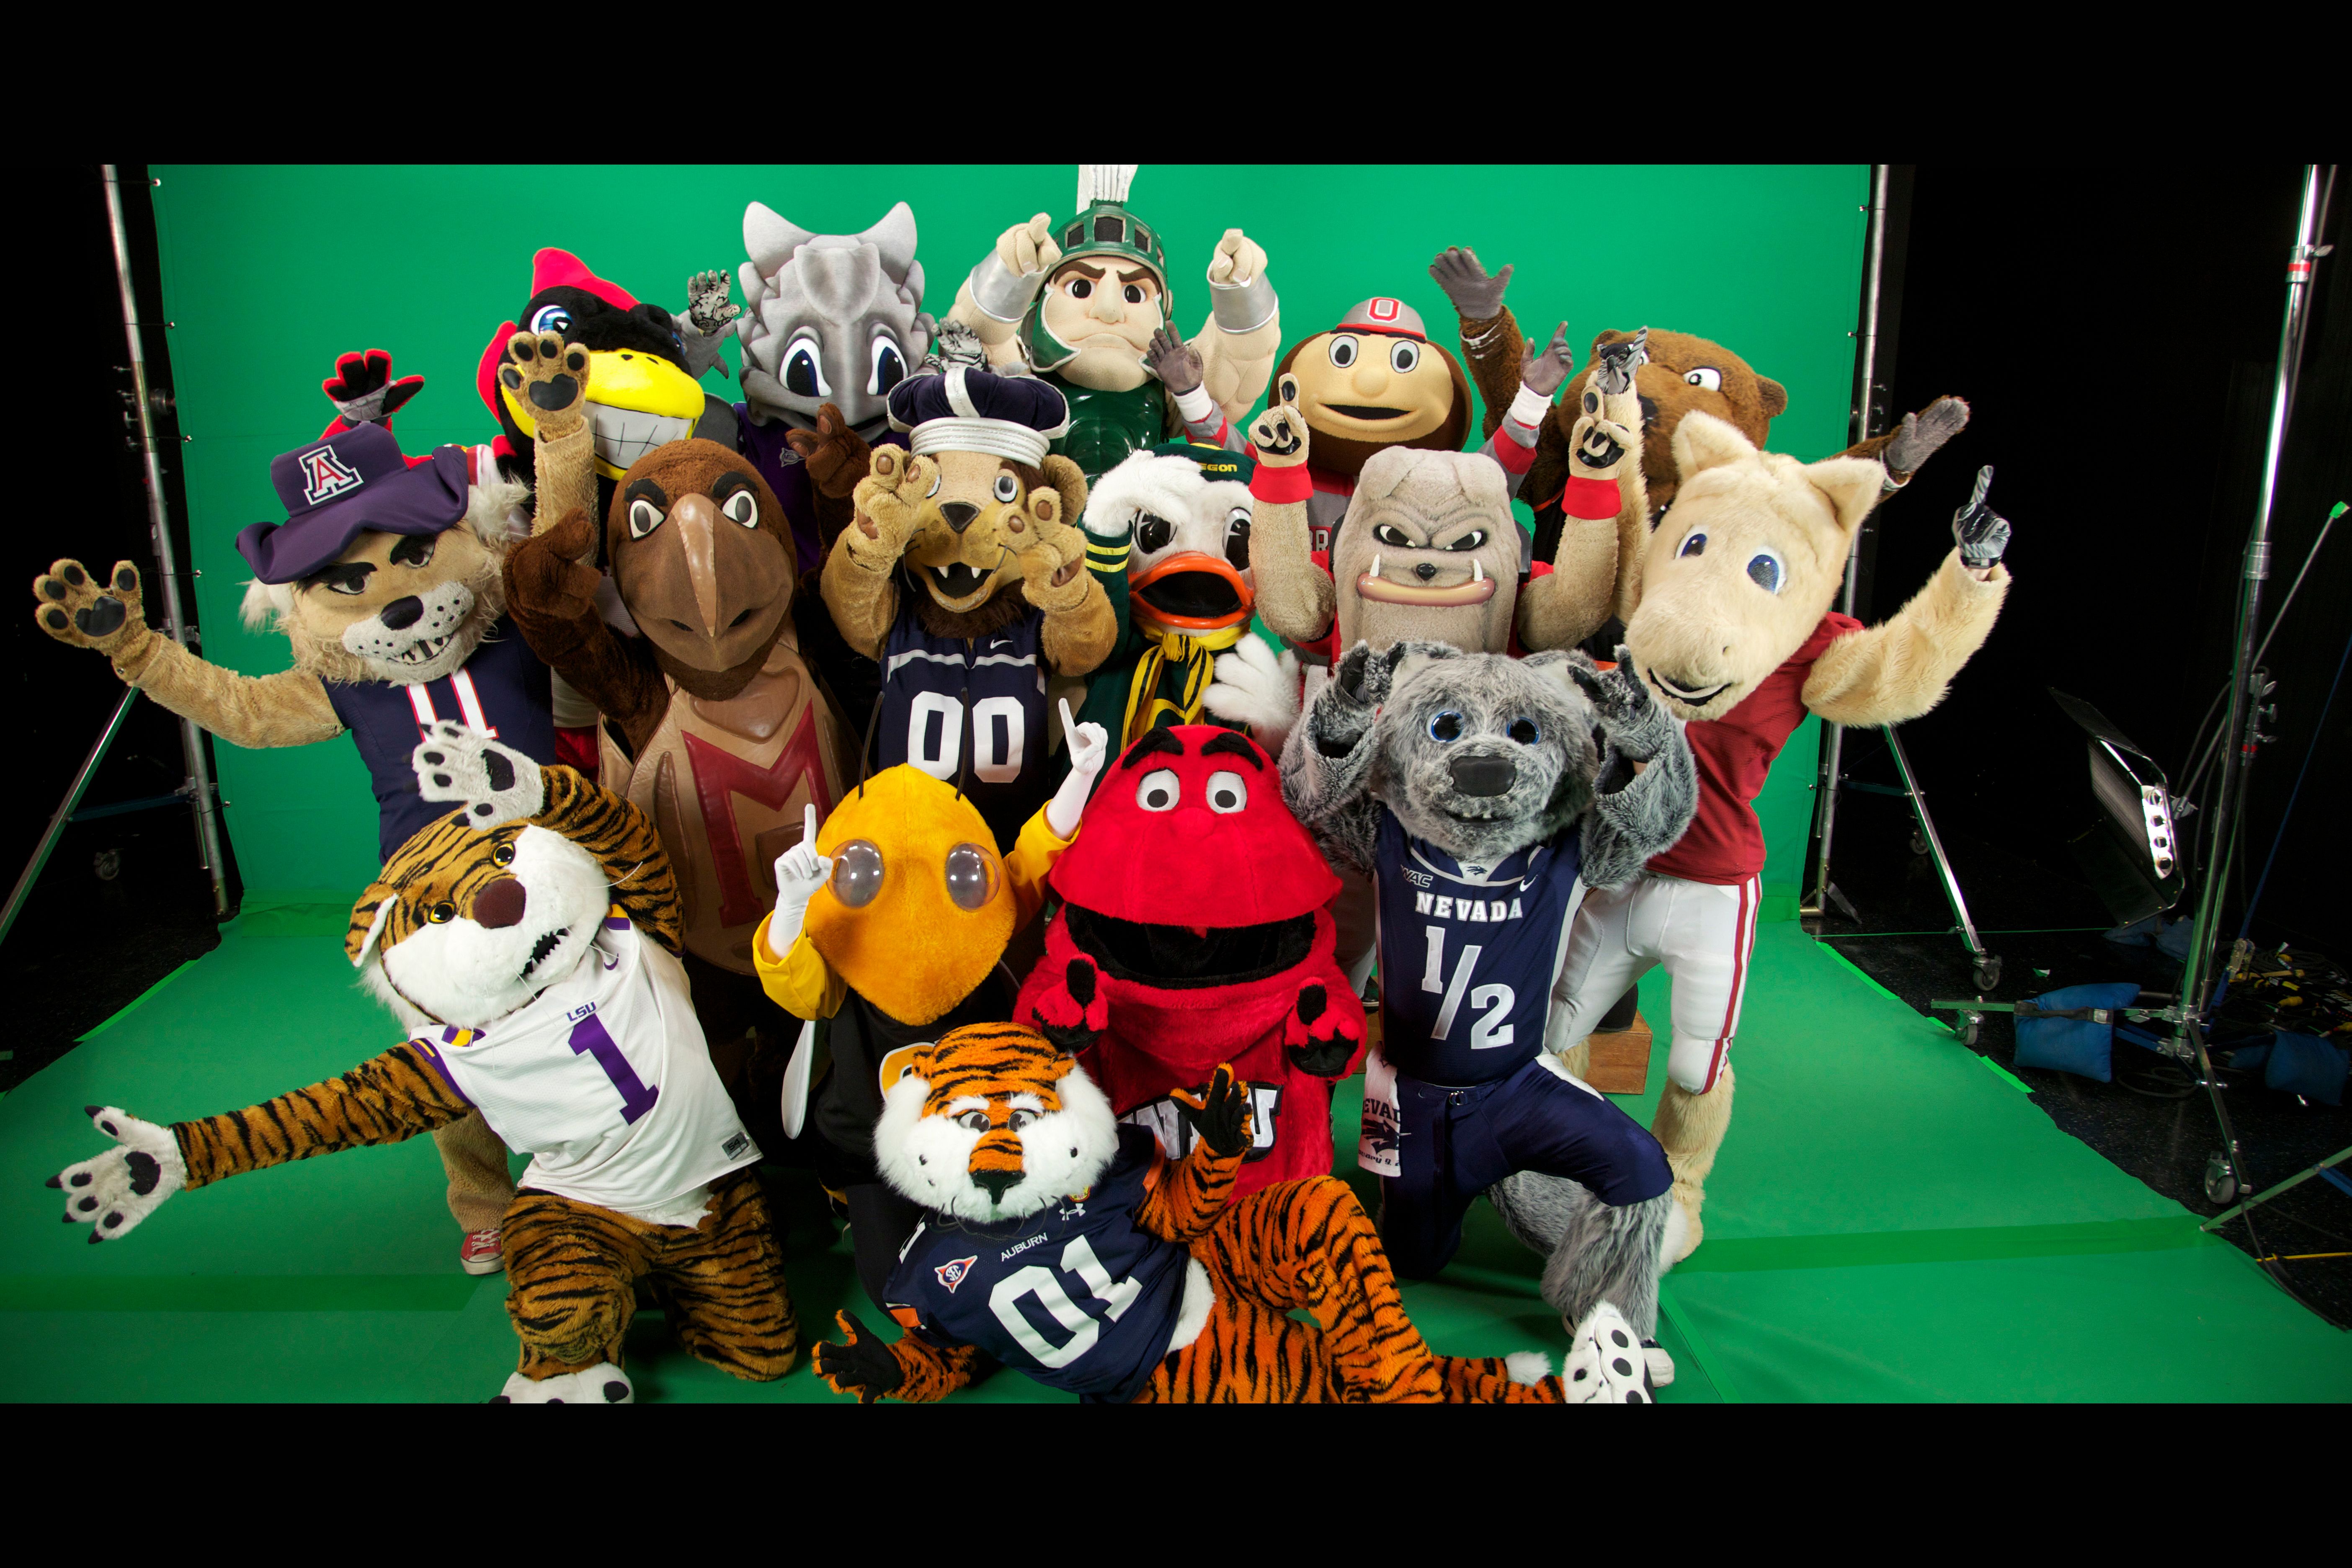 Which NCAA team has the worst mascot?